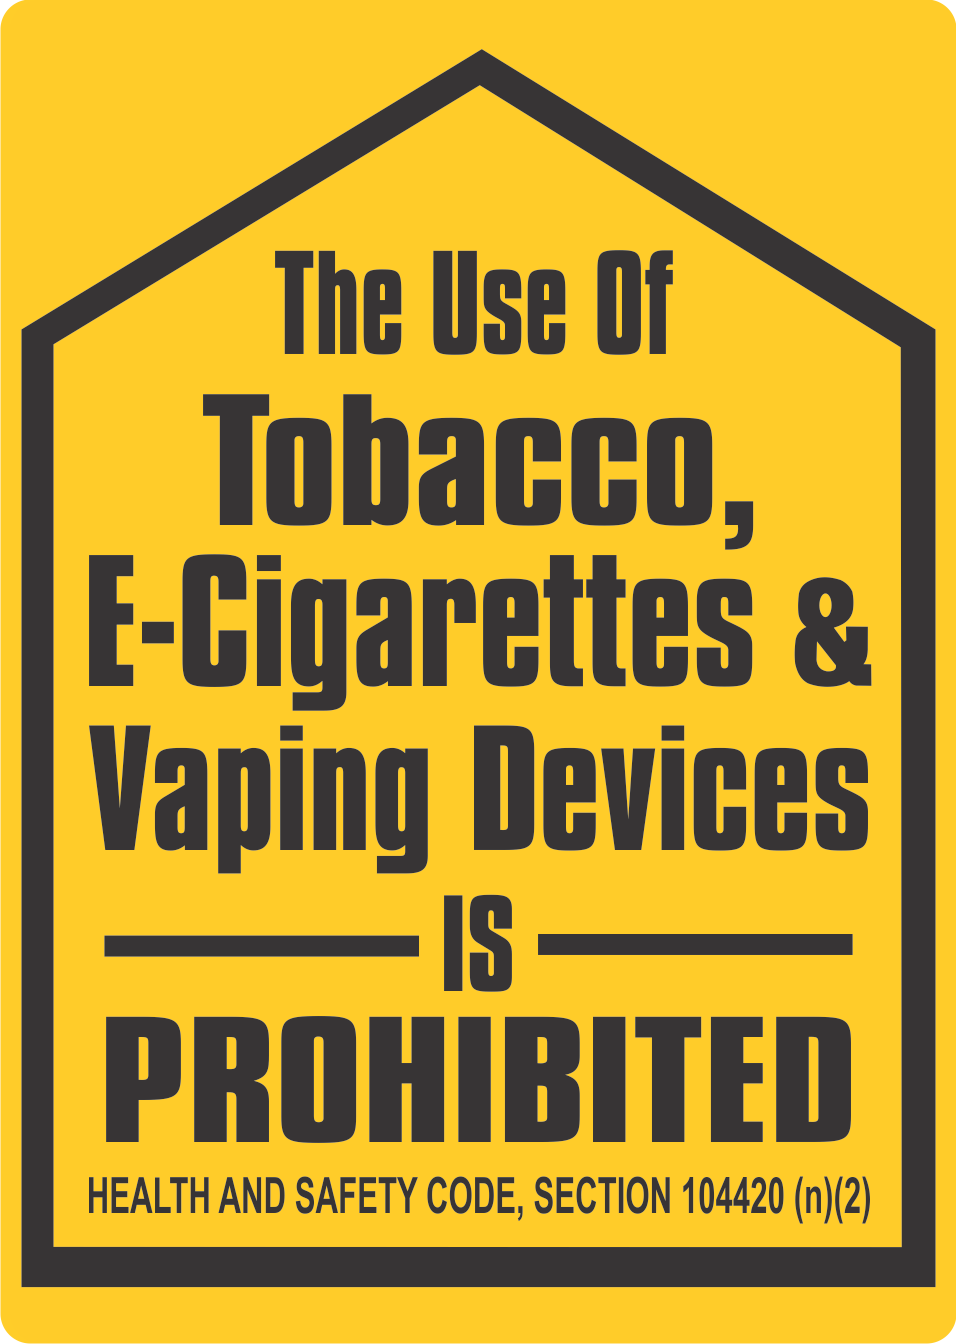 The Use of Tobacco, E-Cigarettes & Vaping Devices is Prohibited Logo